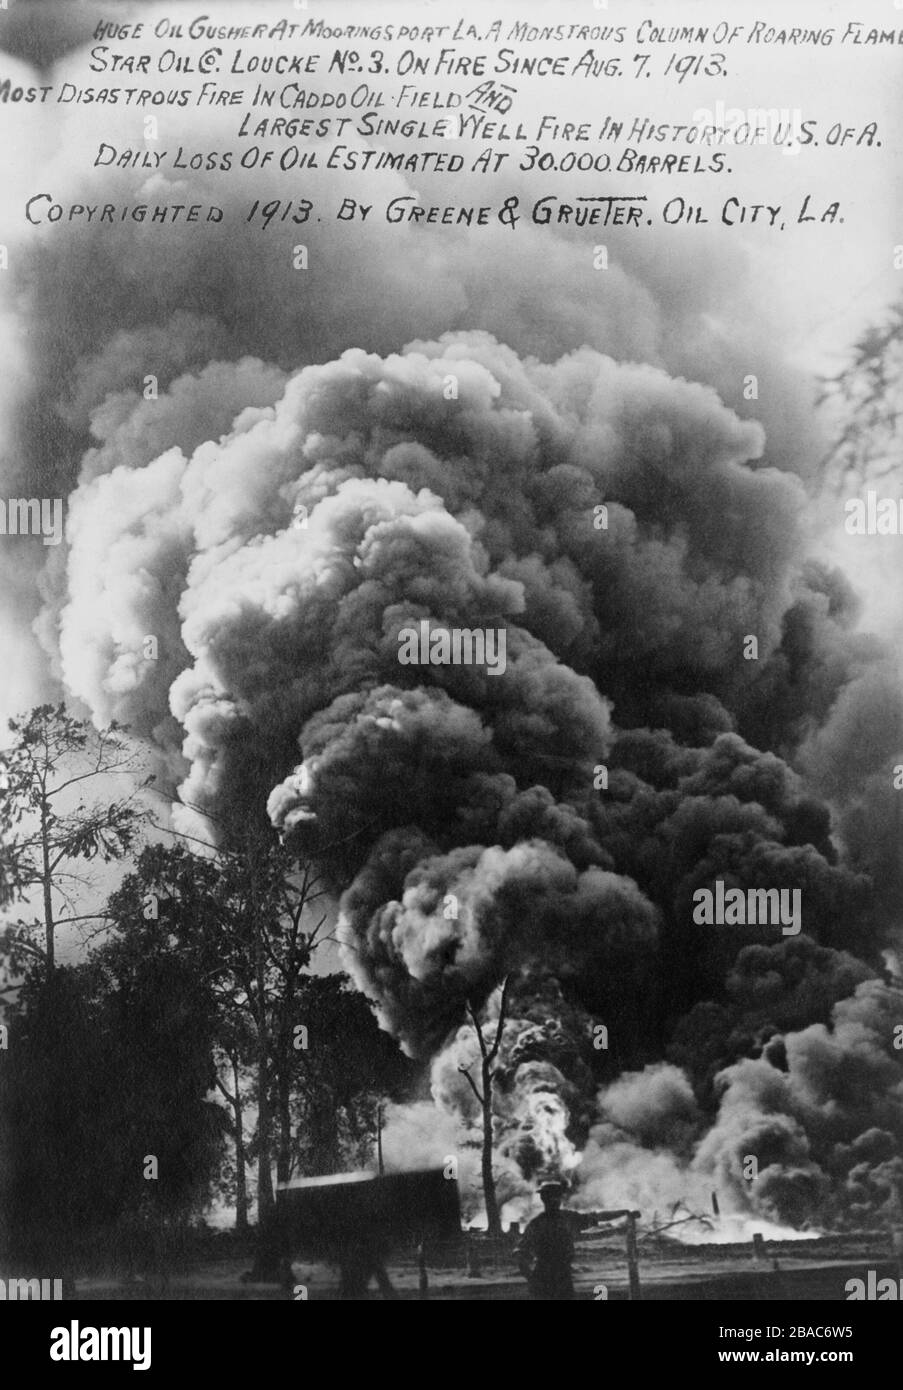 Huge oil gusher fire billows a monstrous column of roaring flame and smoke, August 1913. It started on Aug. 7, at the Star Oil Co. Loucke no. 3, in Mooringsport, Louisiana, and burned through 20,000 barrels per day  (BSLOC 2018 2 87) Stock Photo